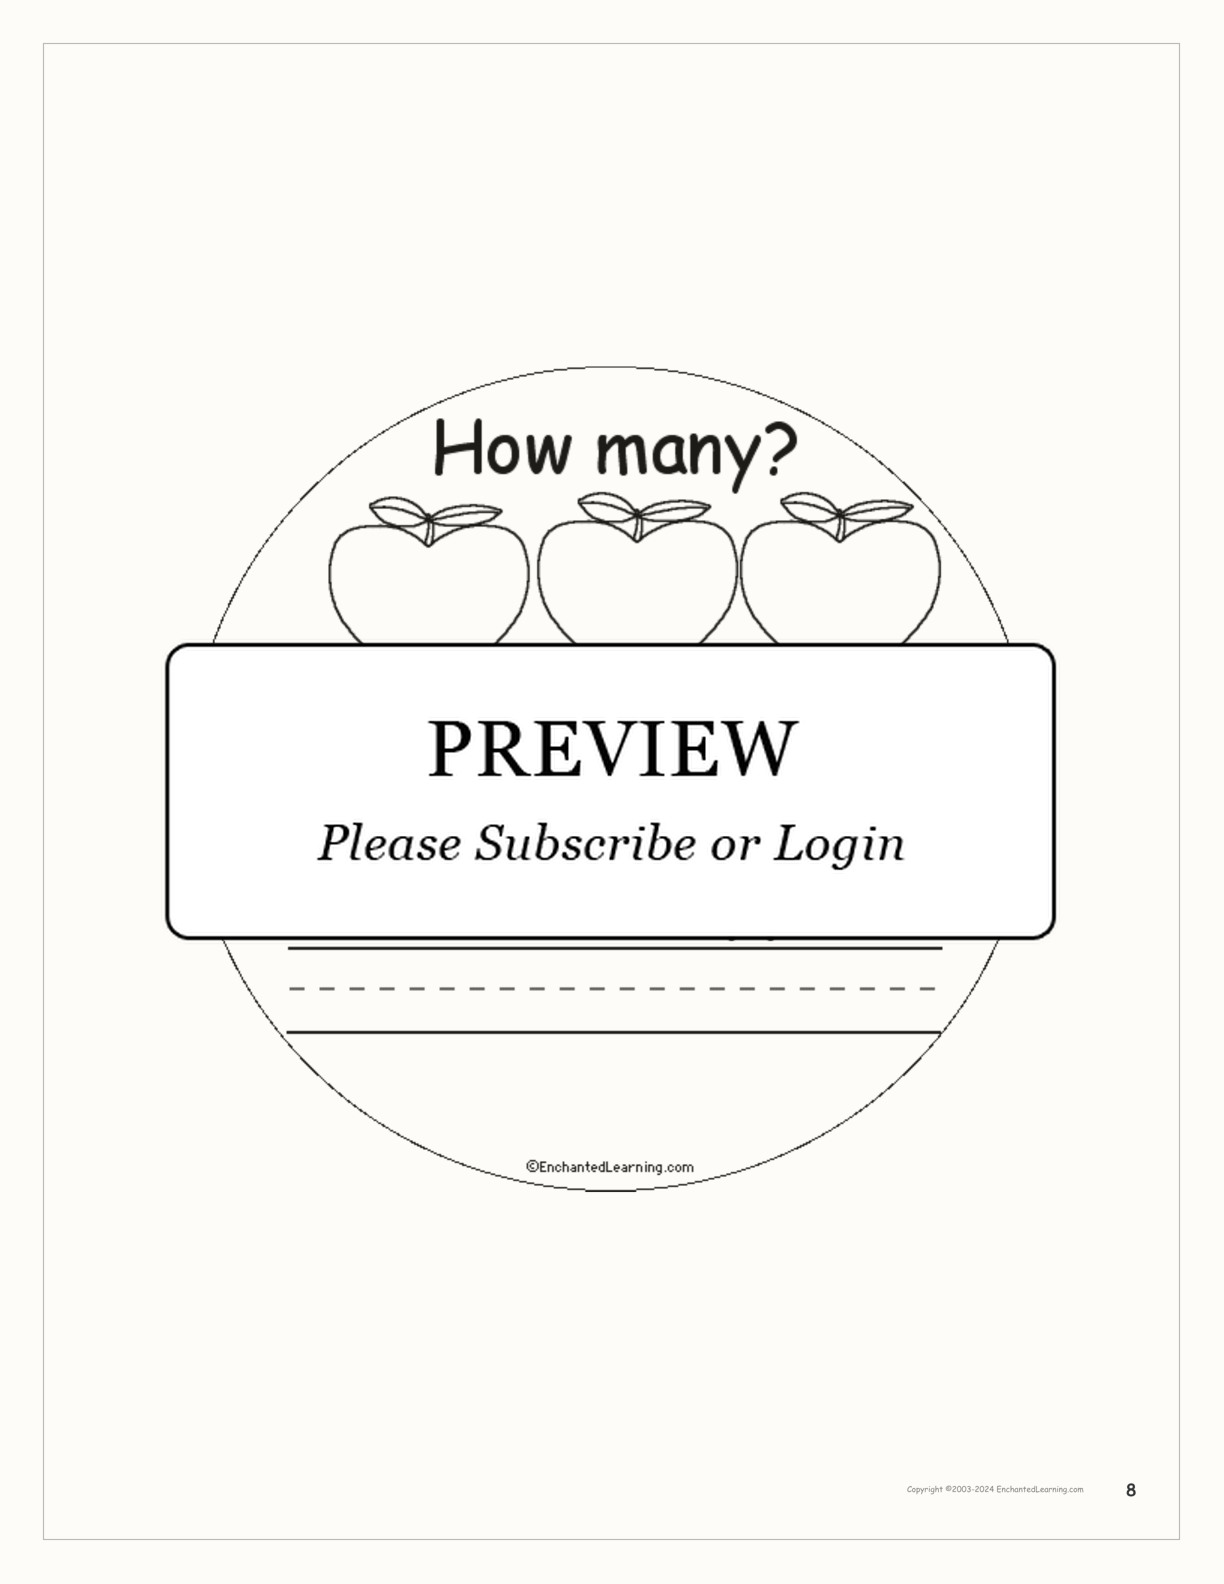 How Many Apples? interactive printout page 8